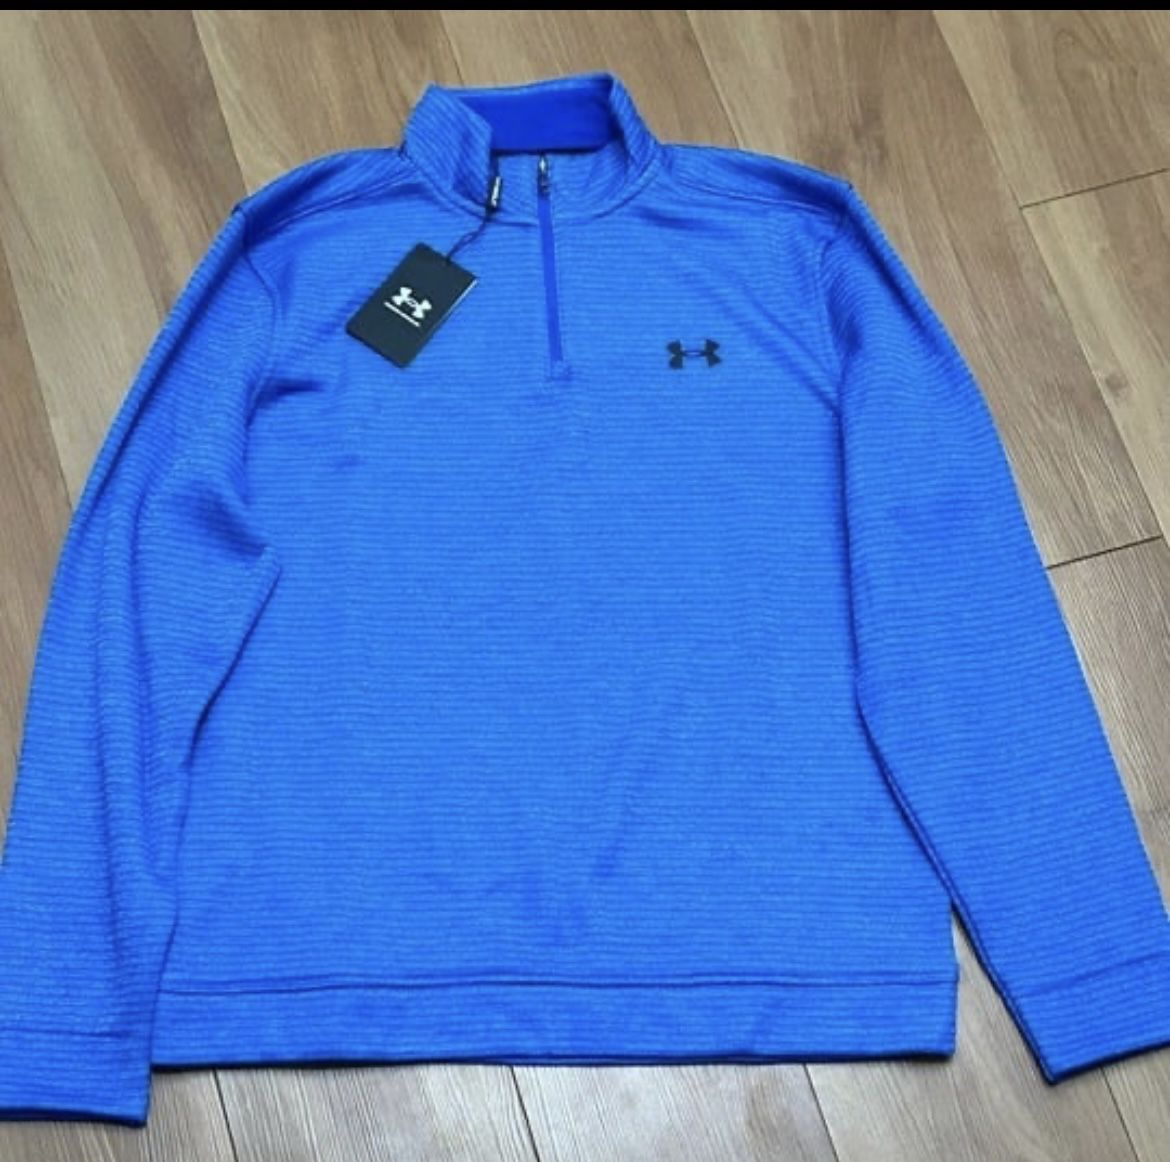 Under Armour Sweater Mens Med Blue Storm Pinstripes Fleece 1/4 Zip Pullover NWT